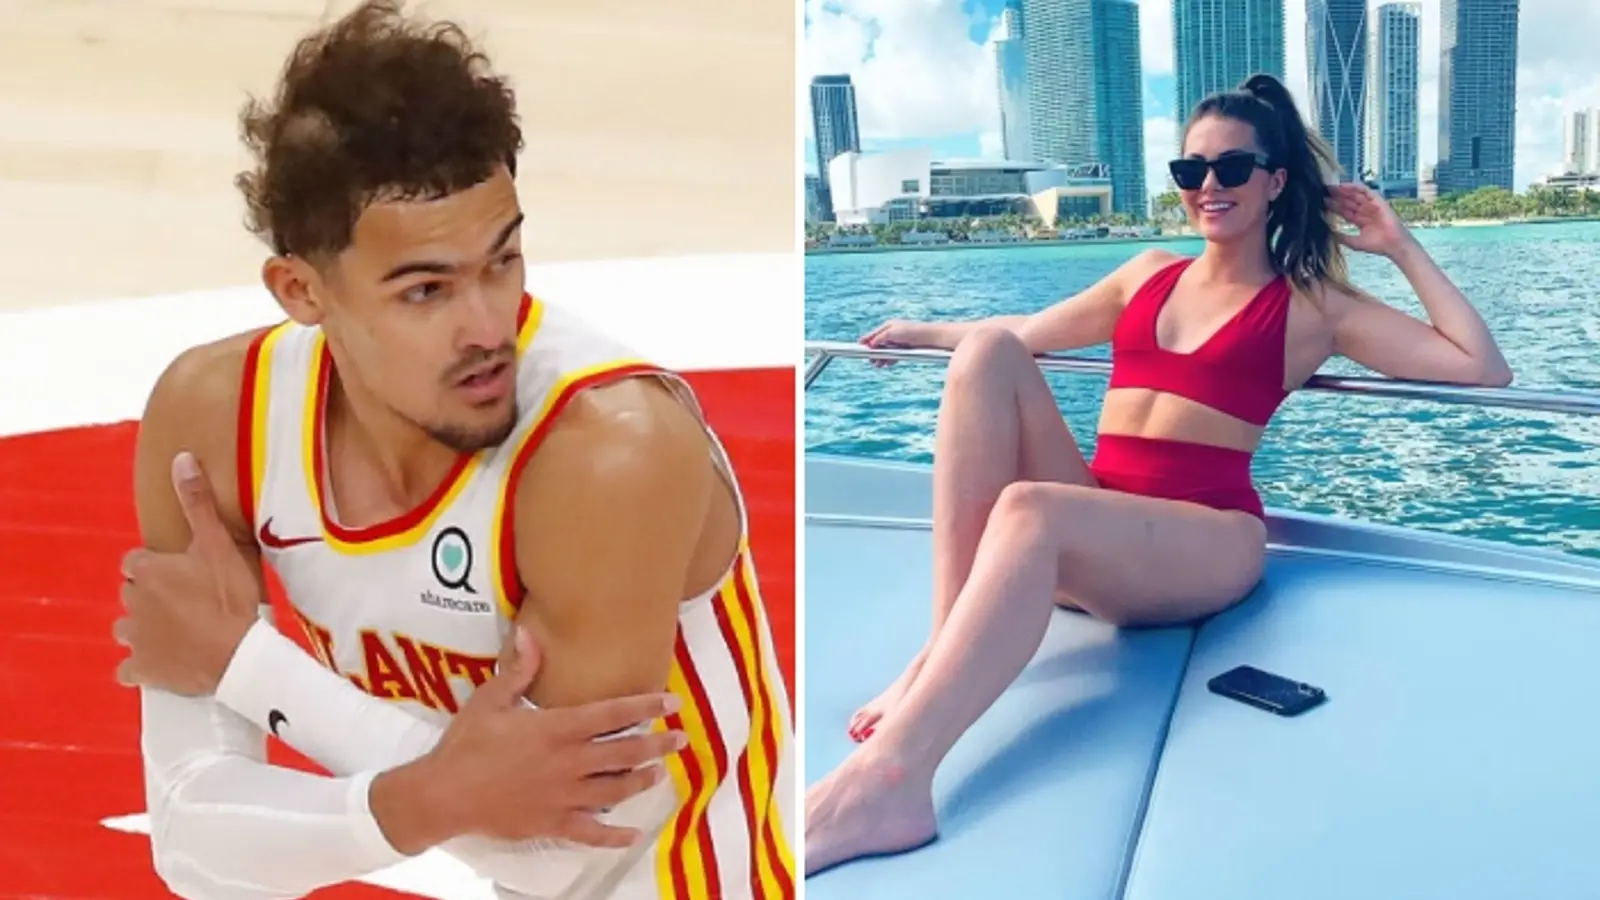 Who Is Trae Young's Wife? All About Shelby Miller